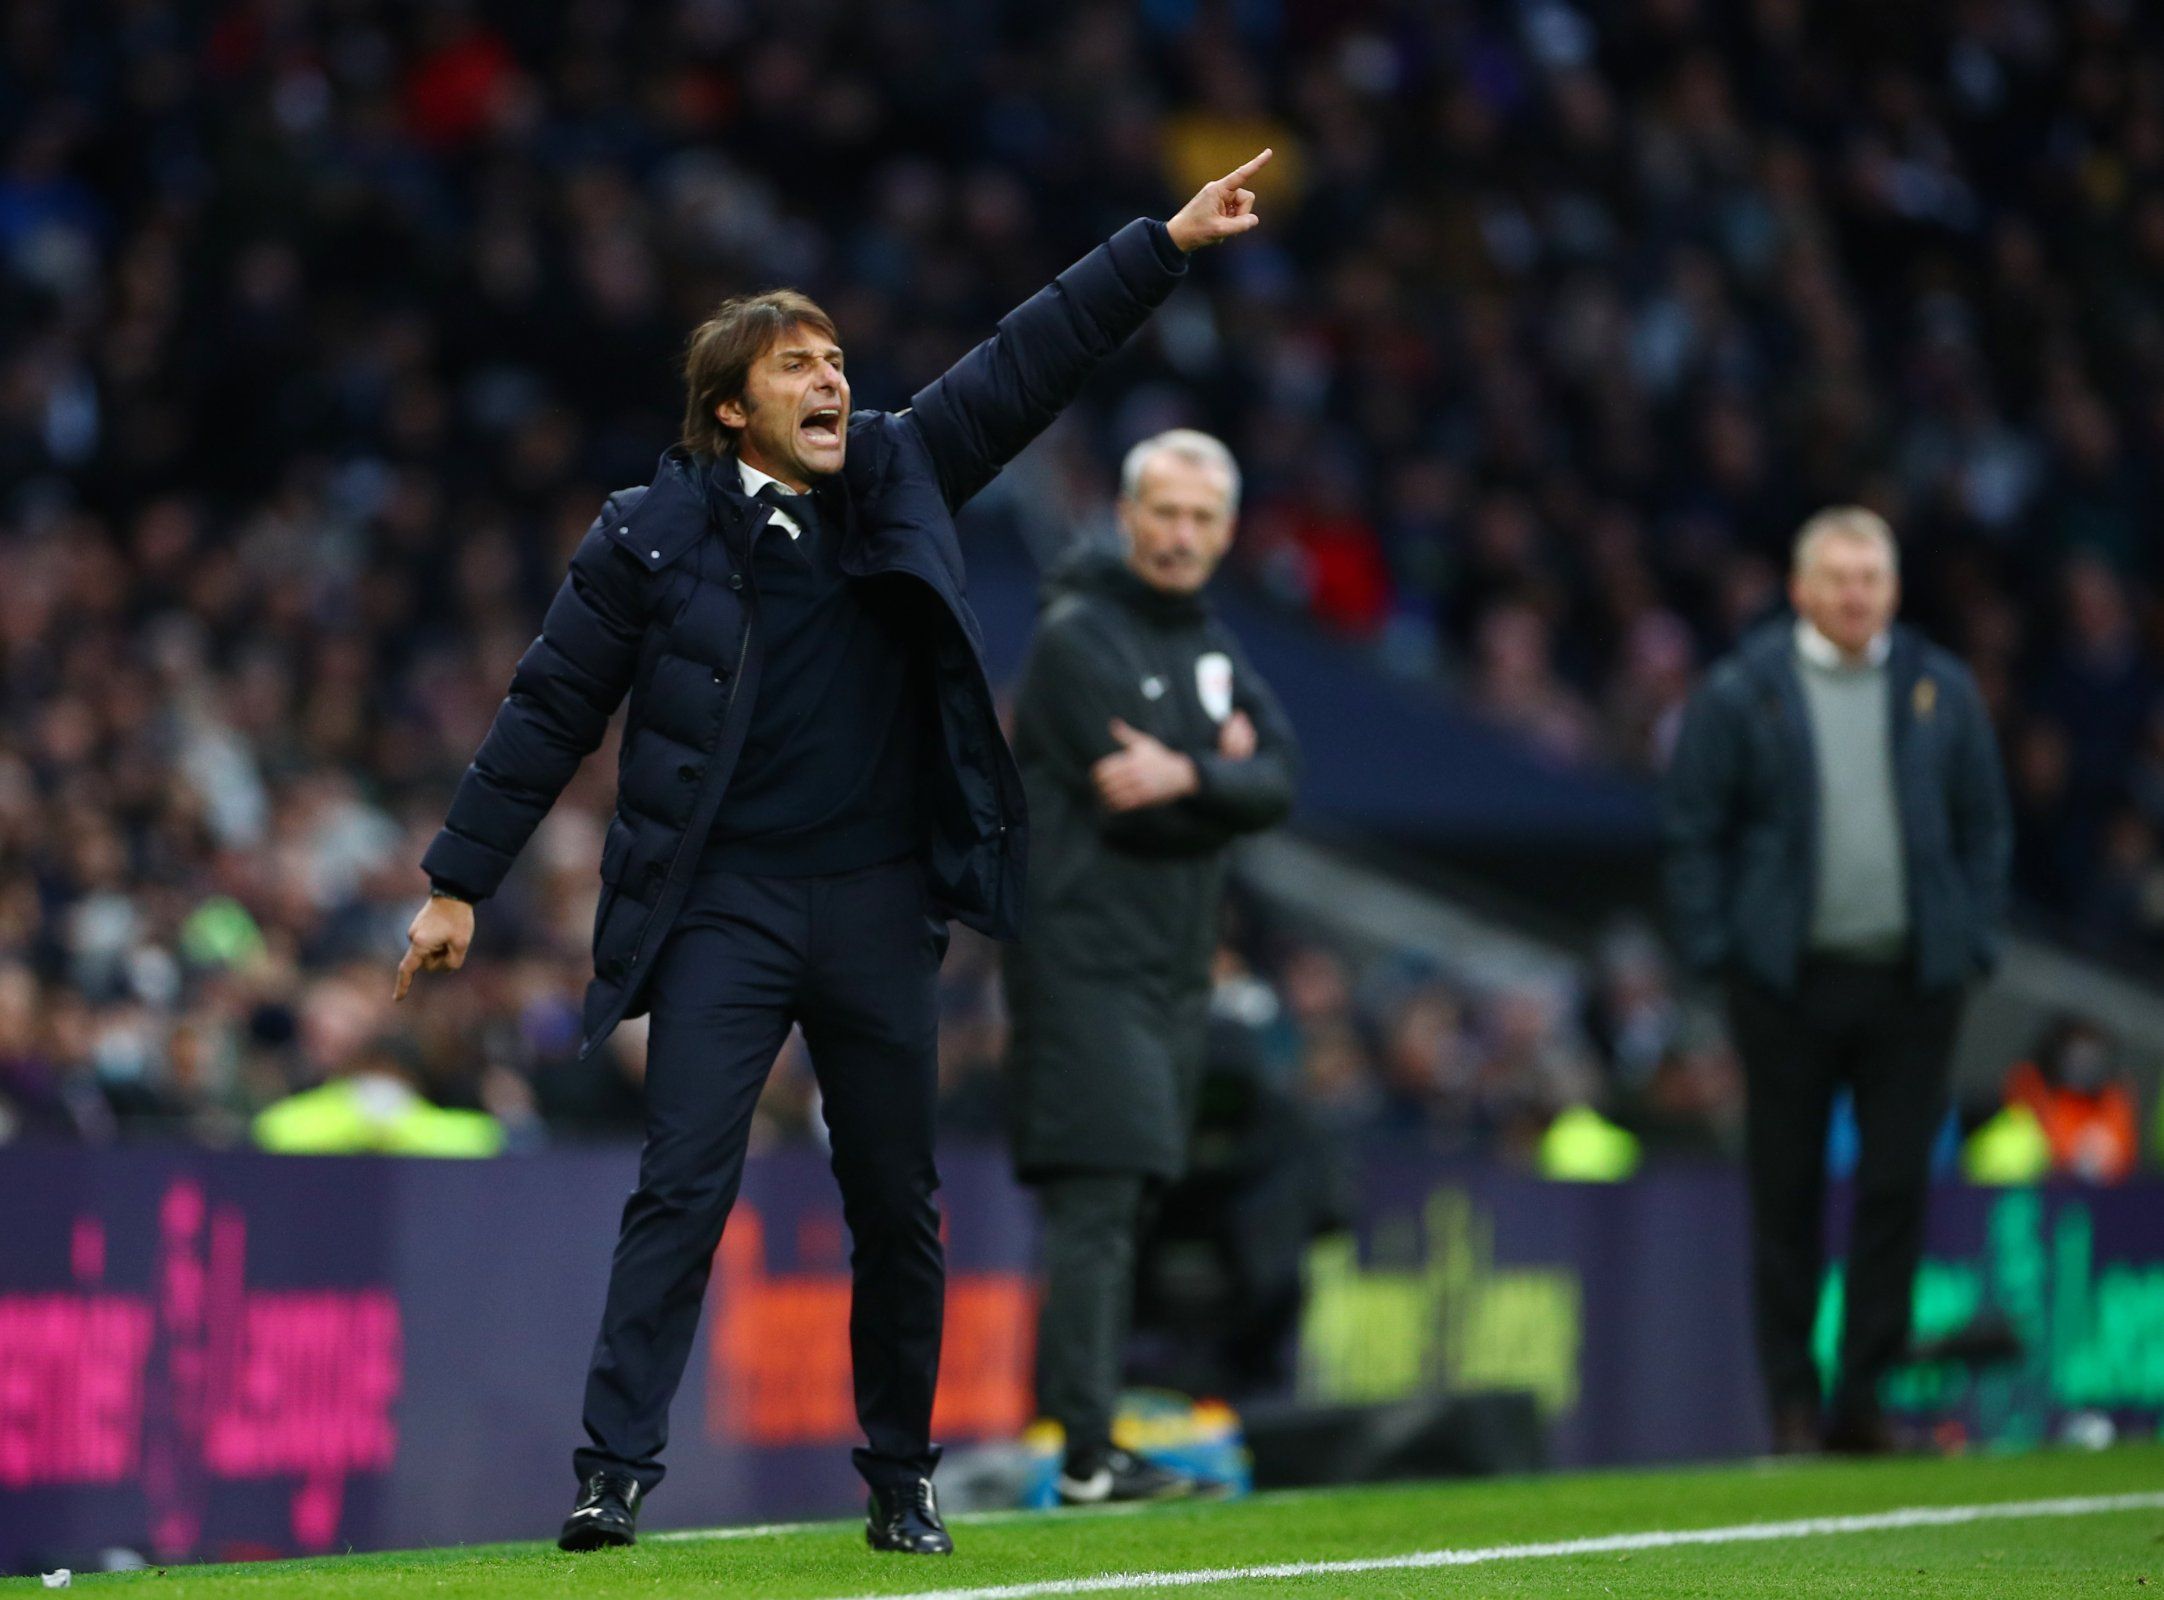 Spurs boss Antonio Conte on the sideline against Norwich City in their Premier League clash, transfer rumours gossip